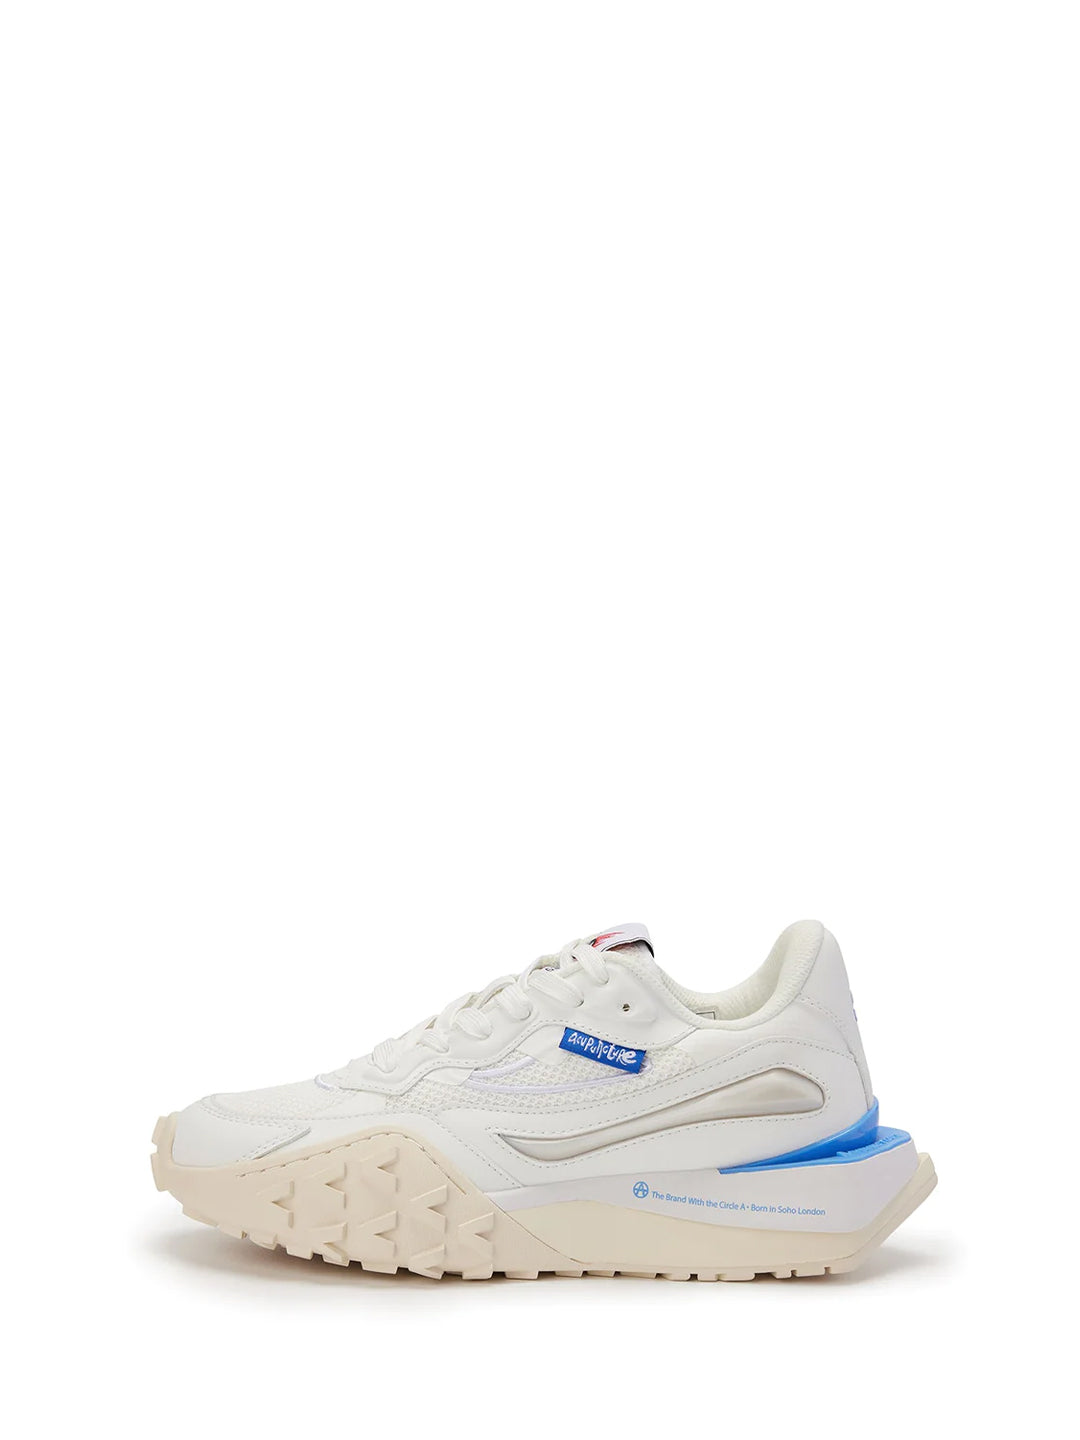 Acupuncture Acu Asym white sneakers